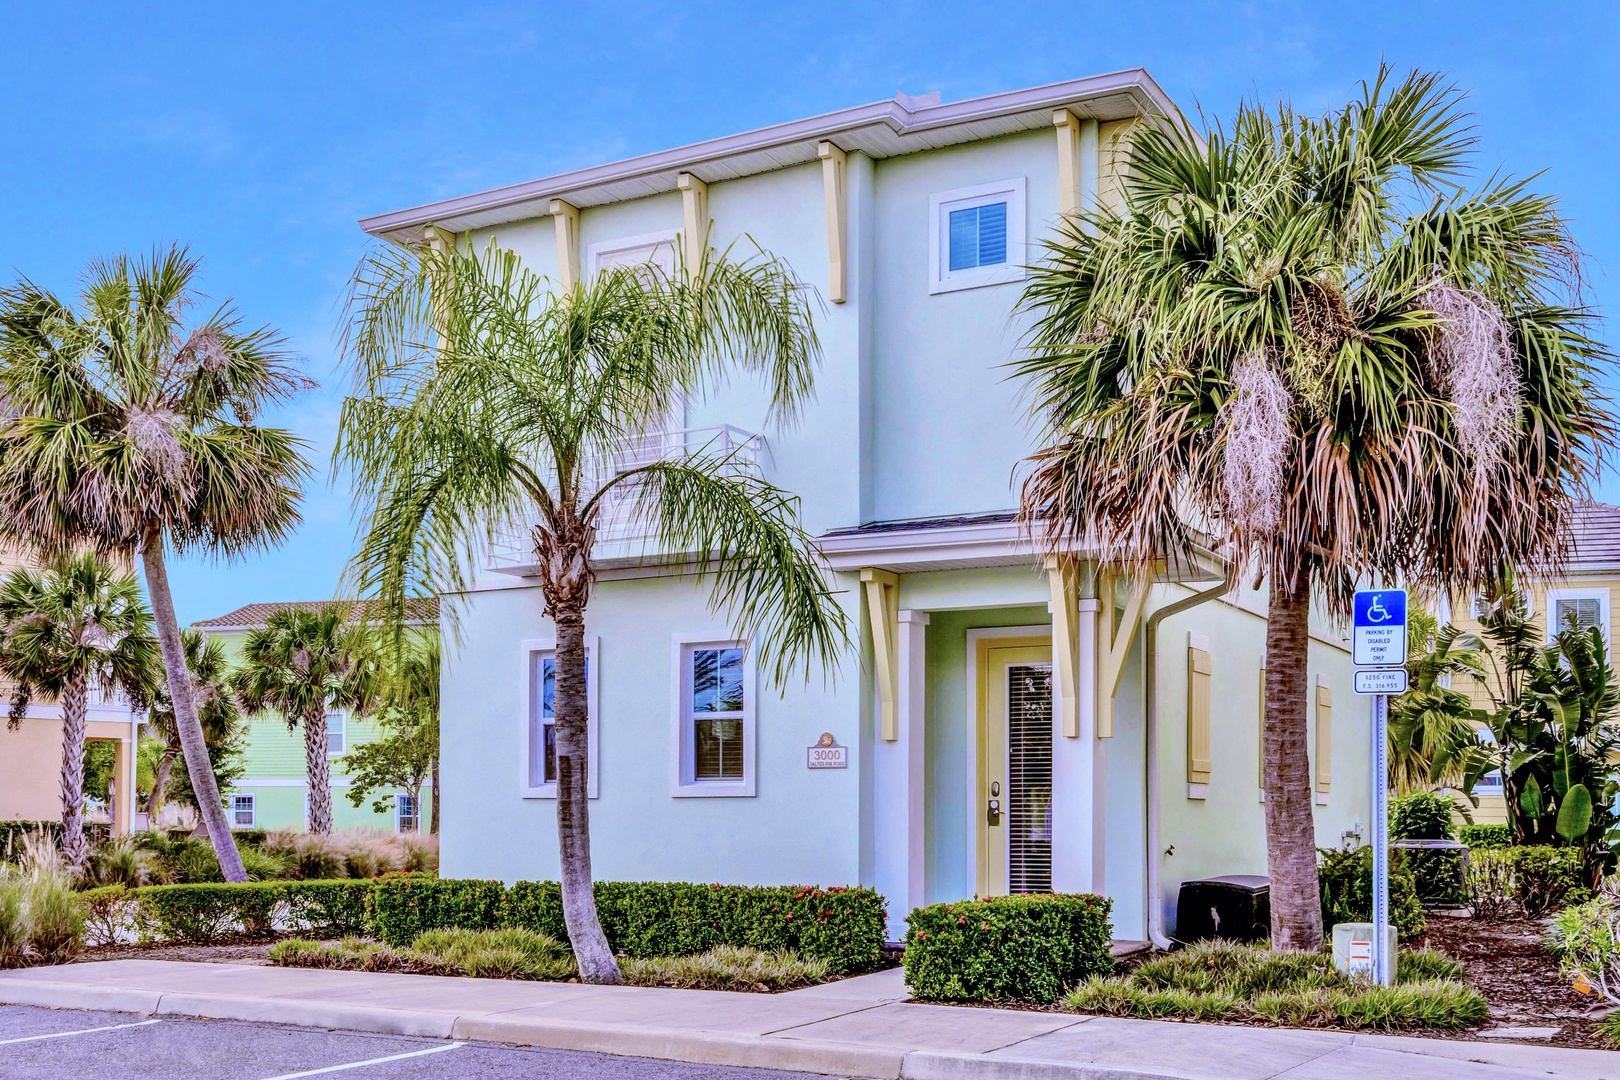 A charming seafoam green cottage on a spacious corner lot in the vibrant Margaritaville Resort